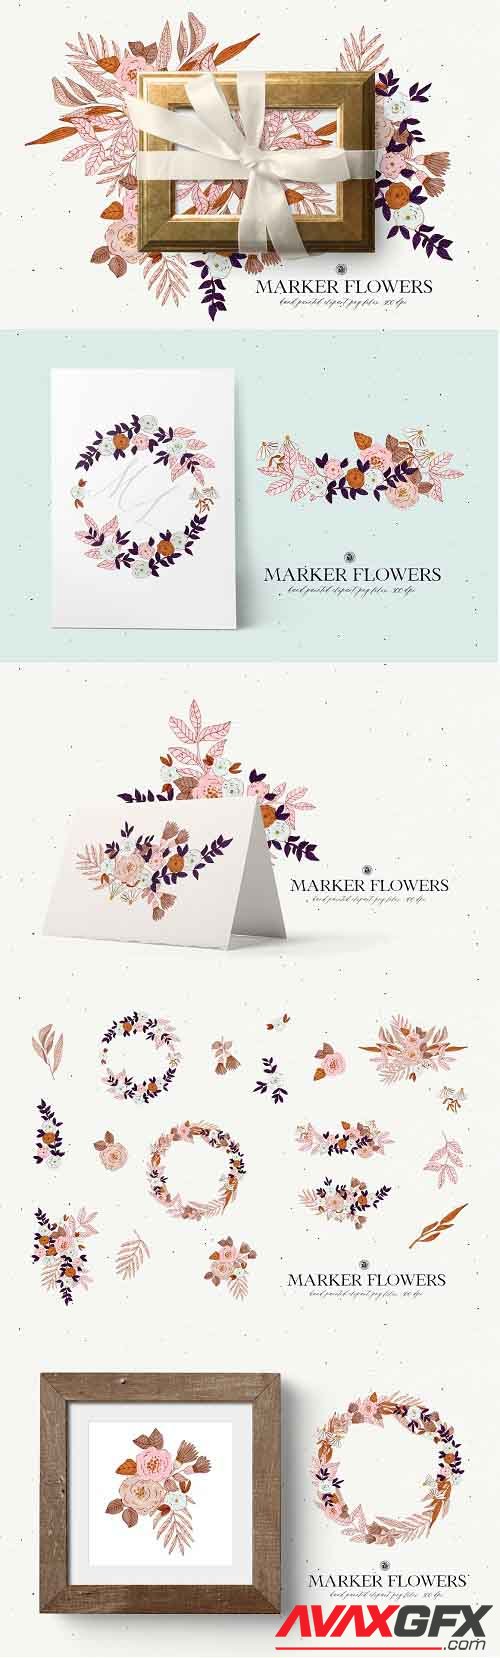 Marker Flowers - floral clipart - 5920393